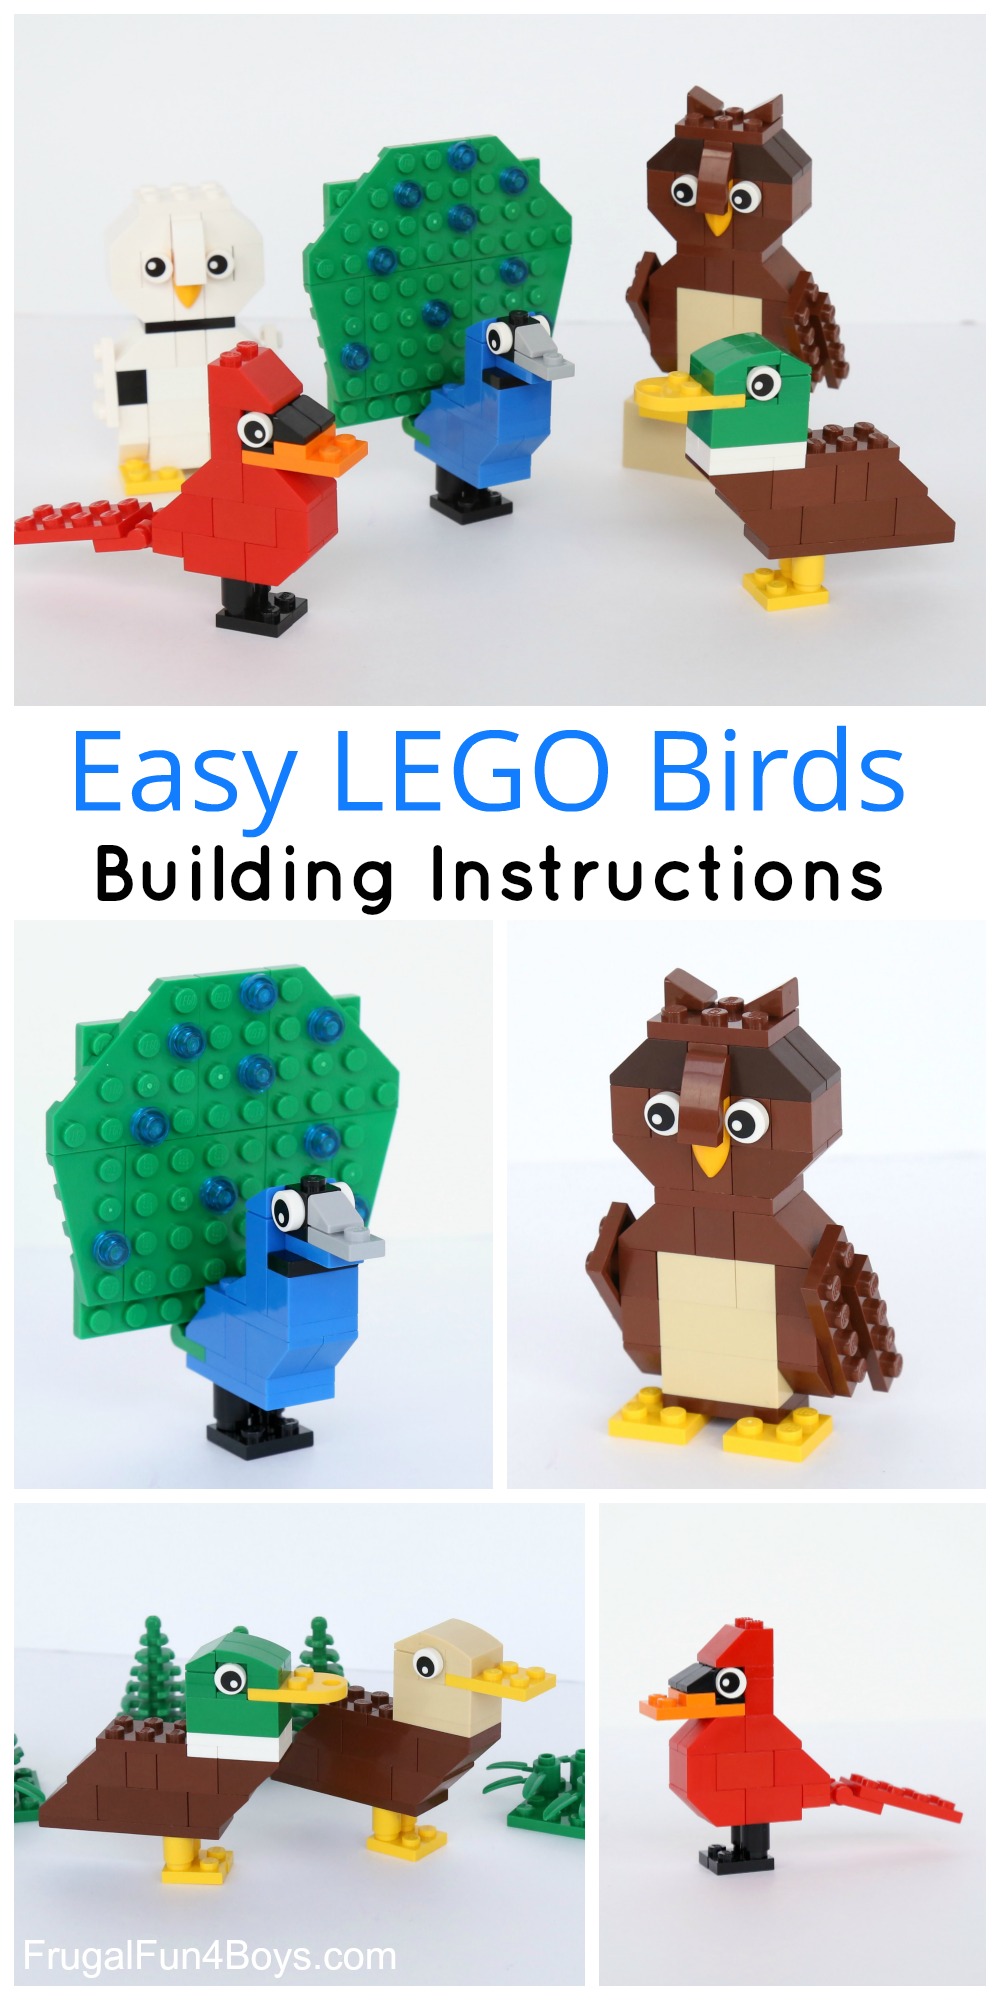 Simple Brick Birds Building Fun For Boys and Girls